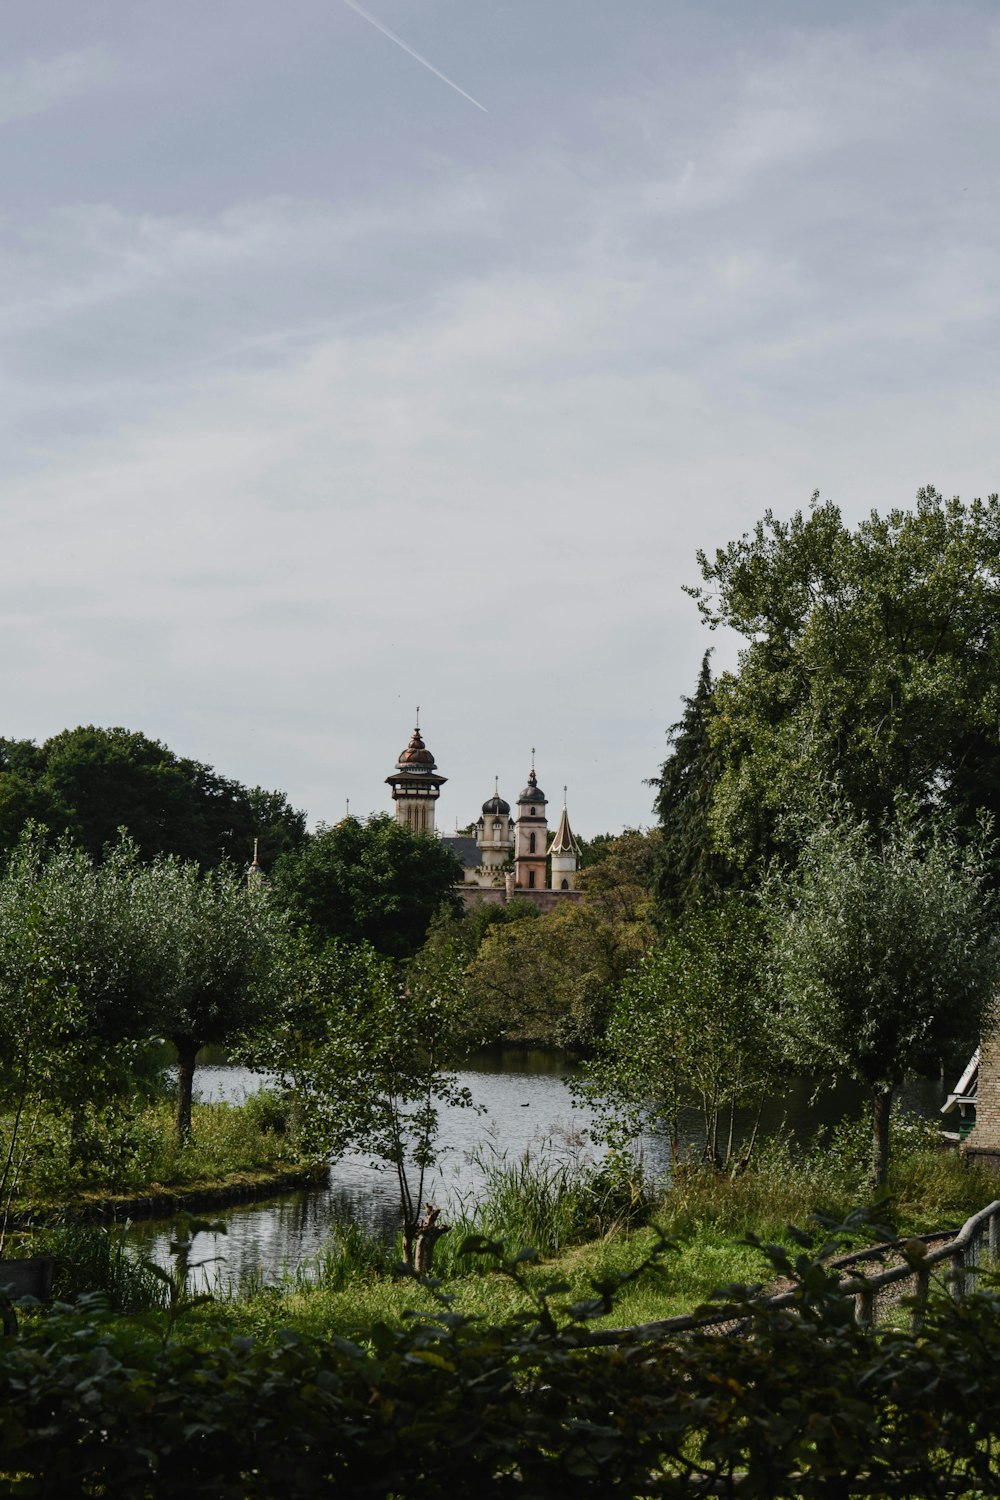 a lake surrounded by trees with a castle in the background